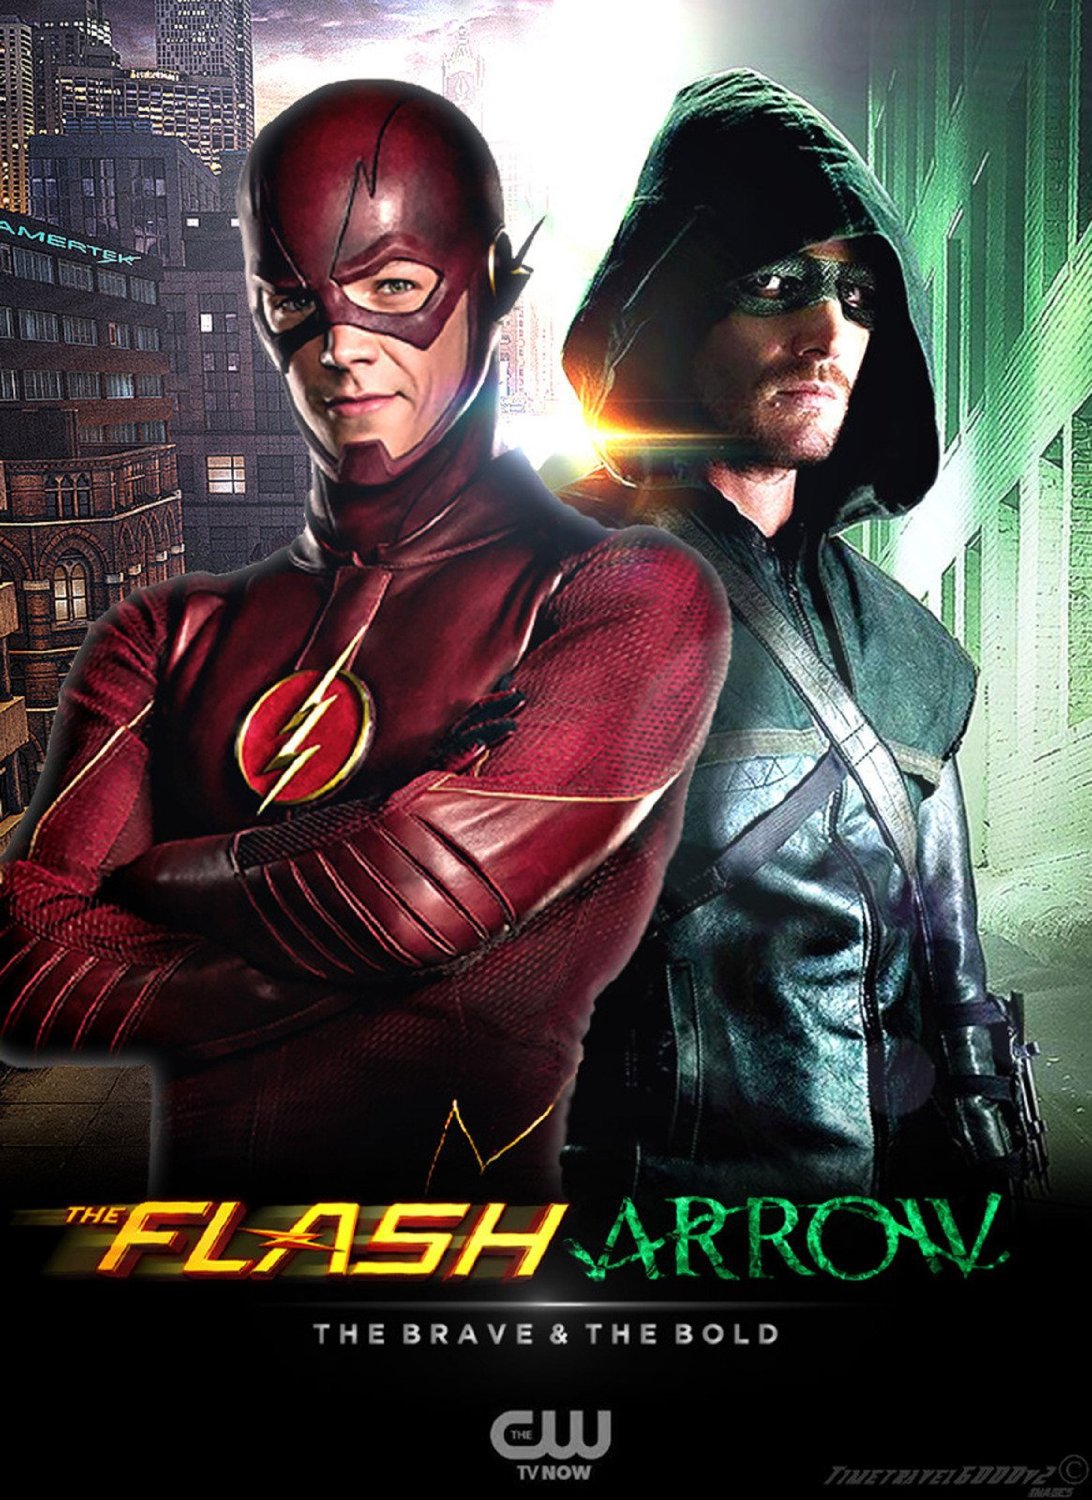 the Flash and Arrow TV Show Poster 13x19 inches